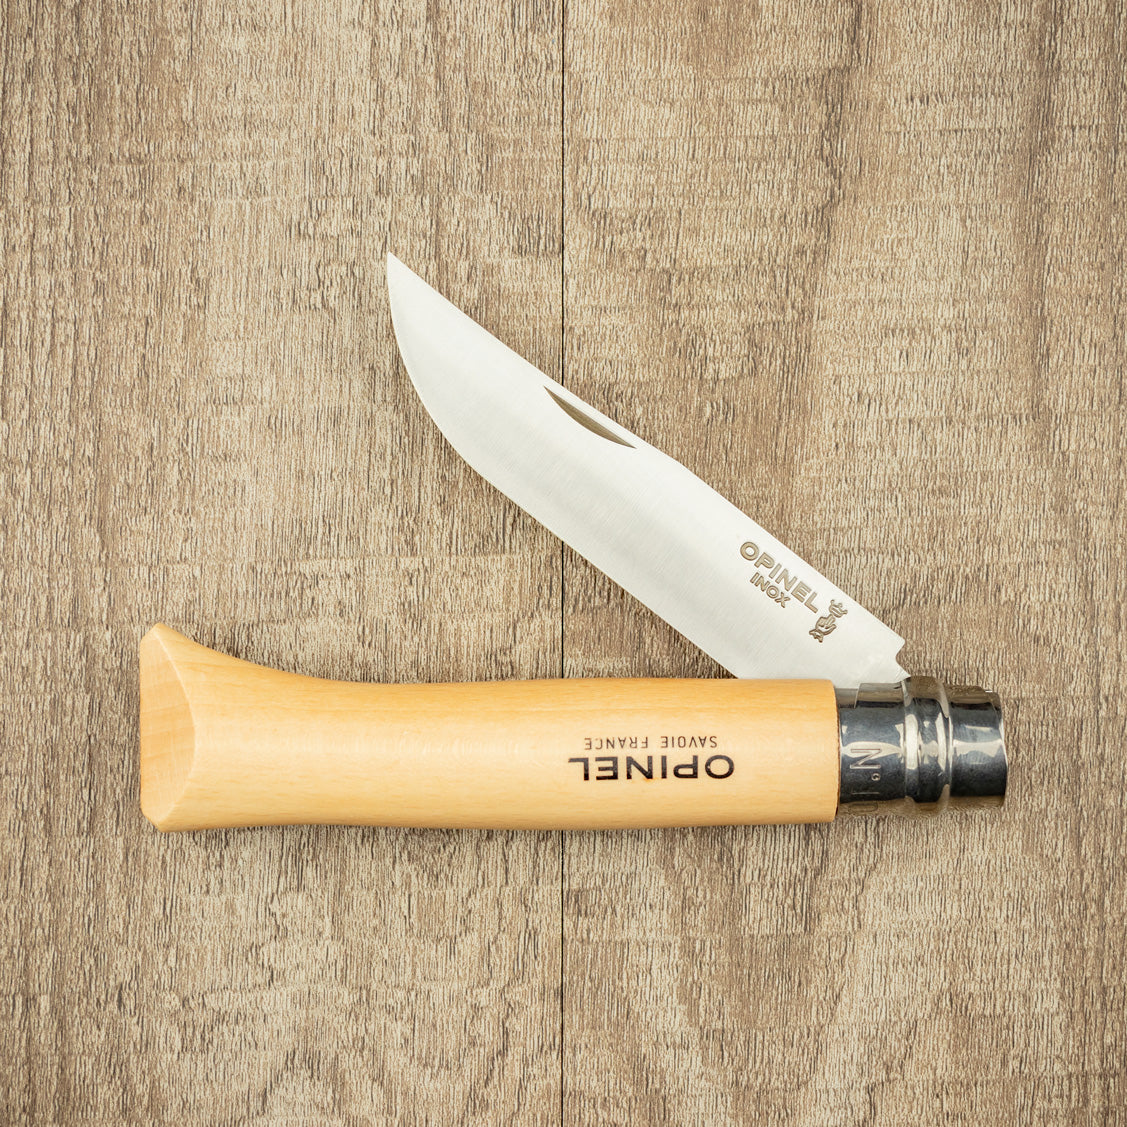 No.02 Stainless Steel Pocket Knife